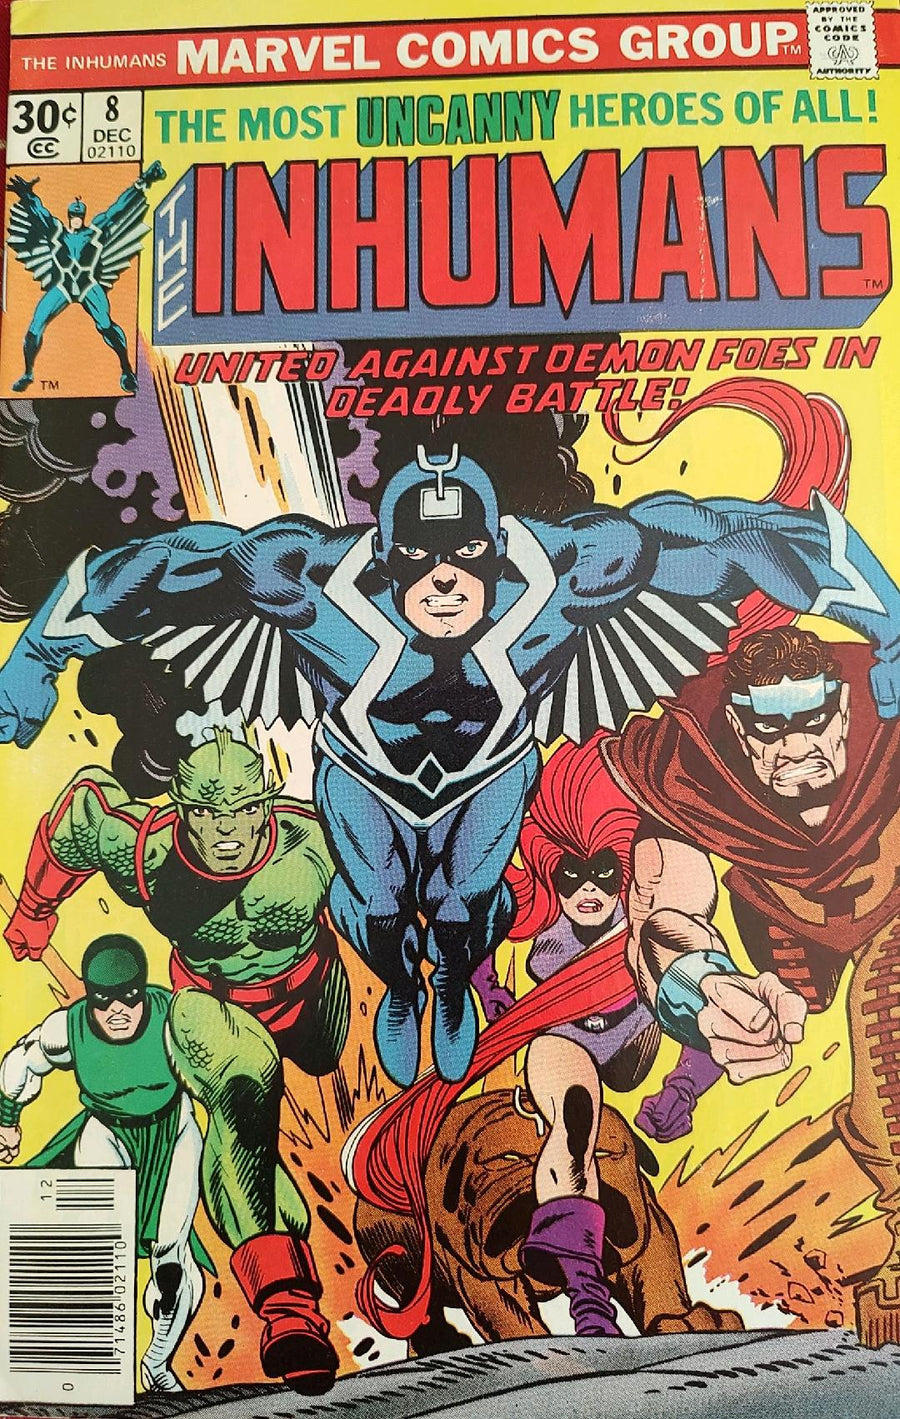 The Inhumans #8 Comic Book Cover